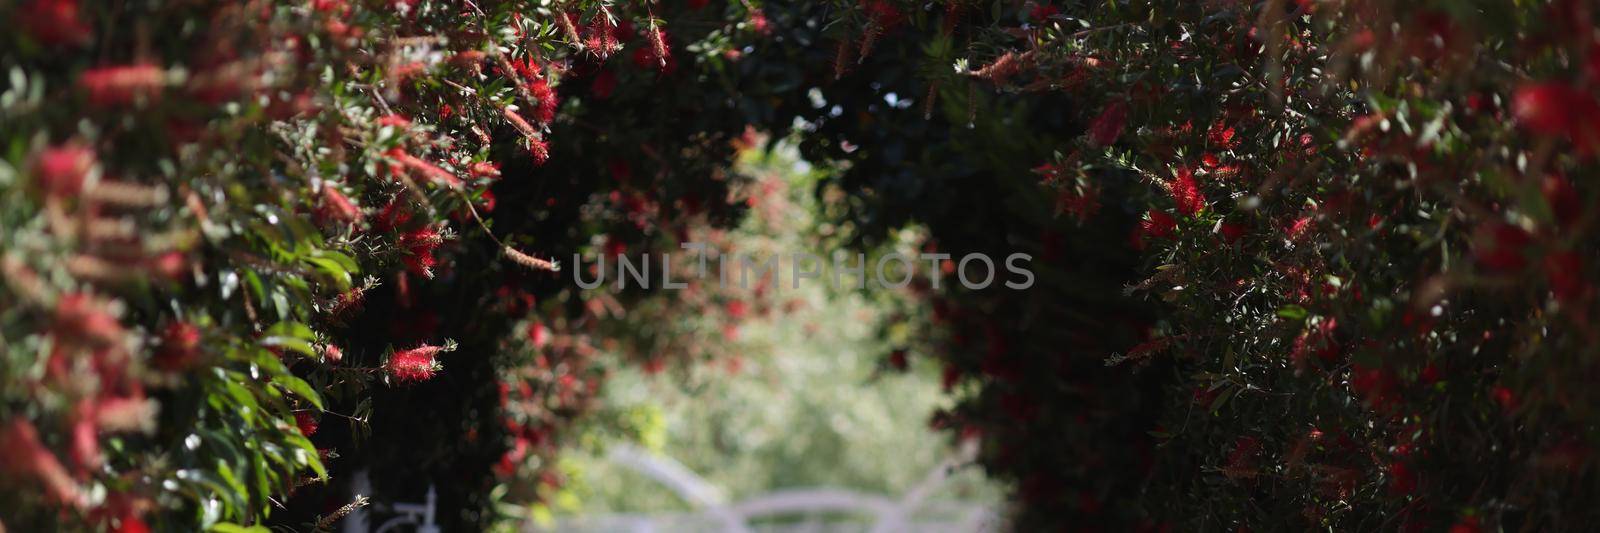 Arch of red flowers on street background. Landscape design concept